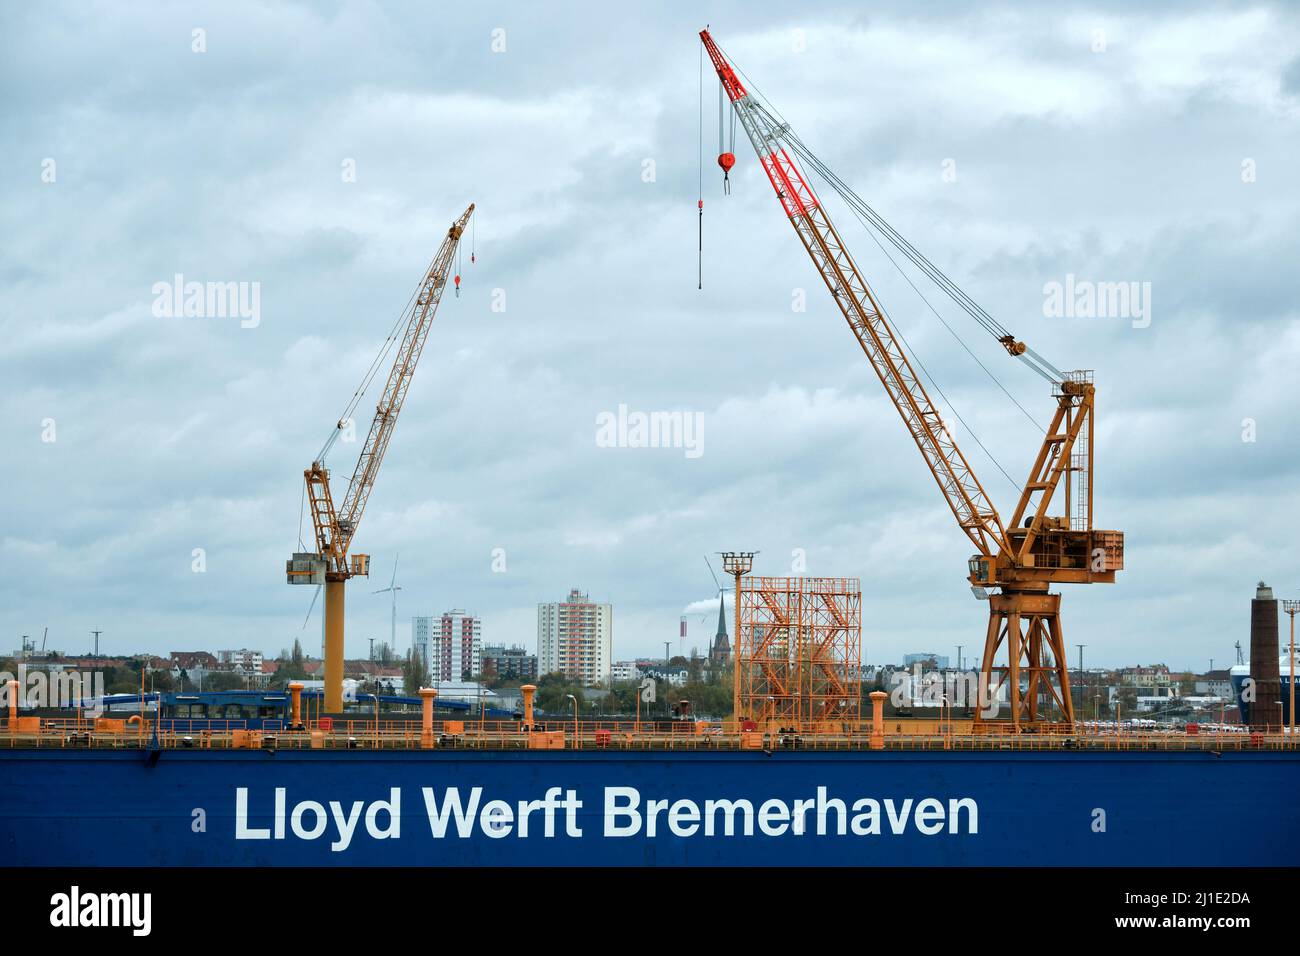 04.11.2021, Germany, Bremen, Bremerhaven - Lloyd Werft Bremerhaven GmbH, belongs to the Chinese Genting Group, filed for insolvency with MV-Werften in Stock Photo